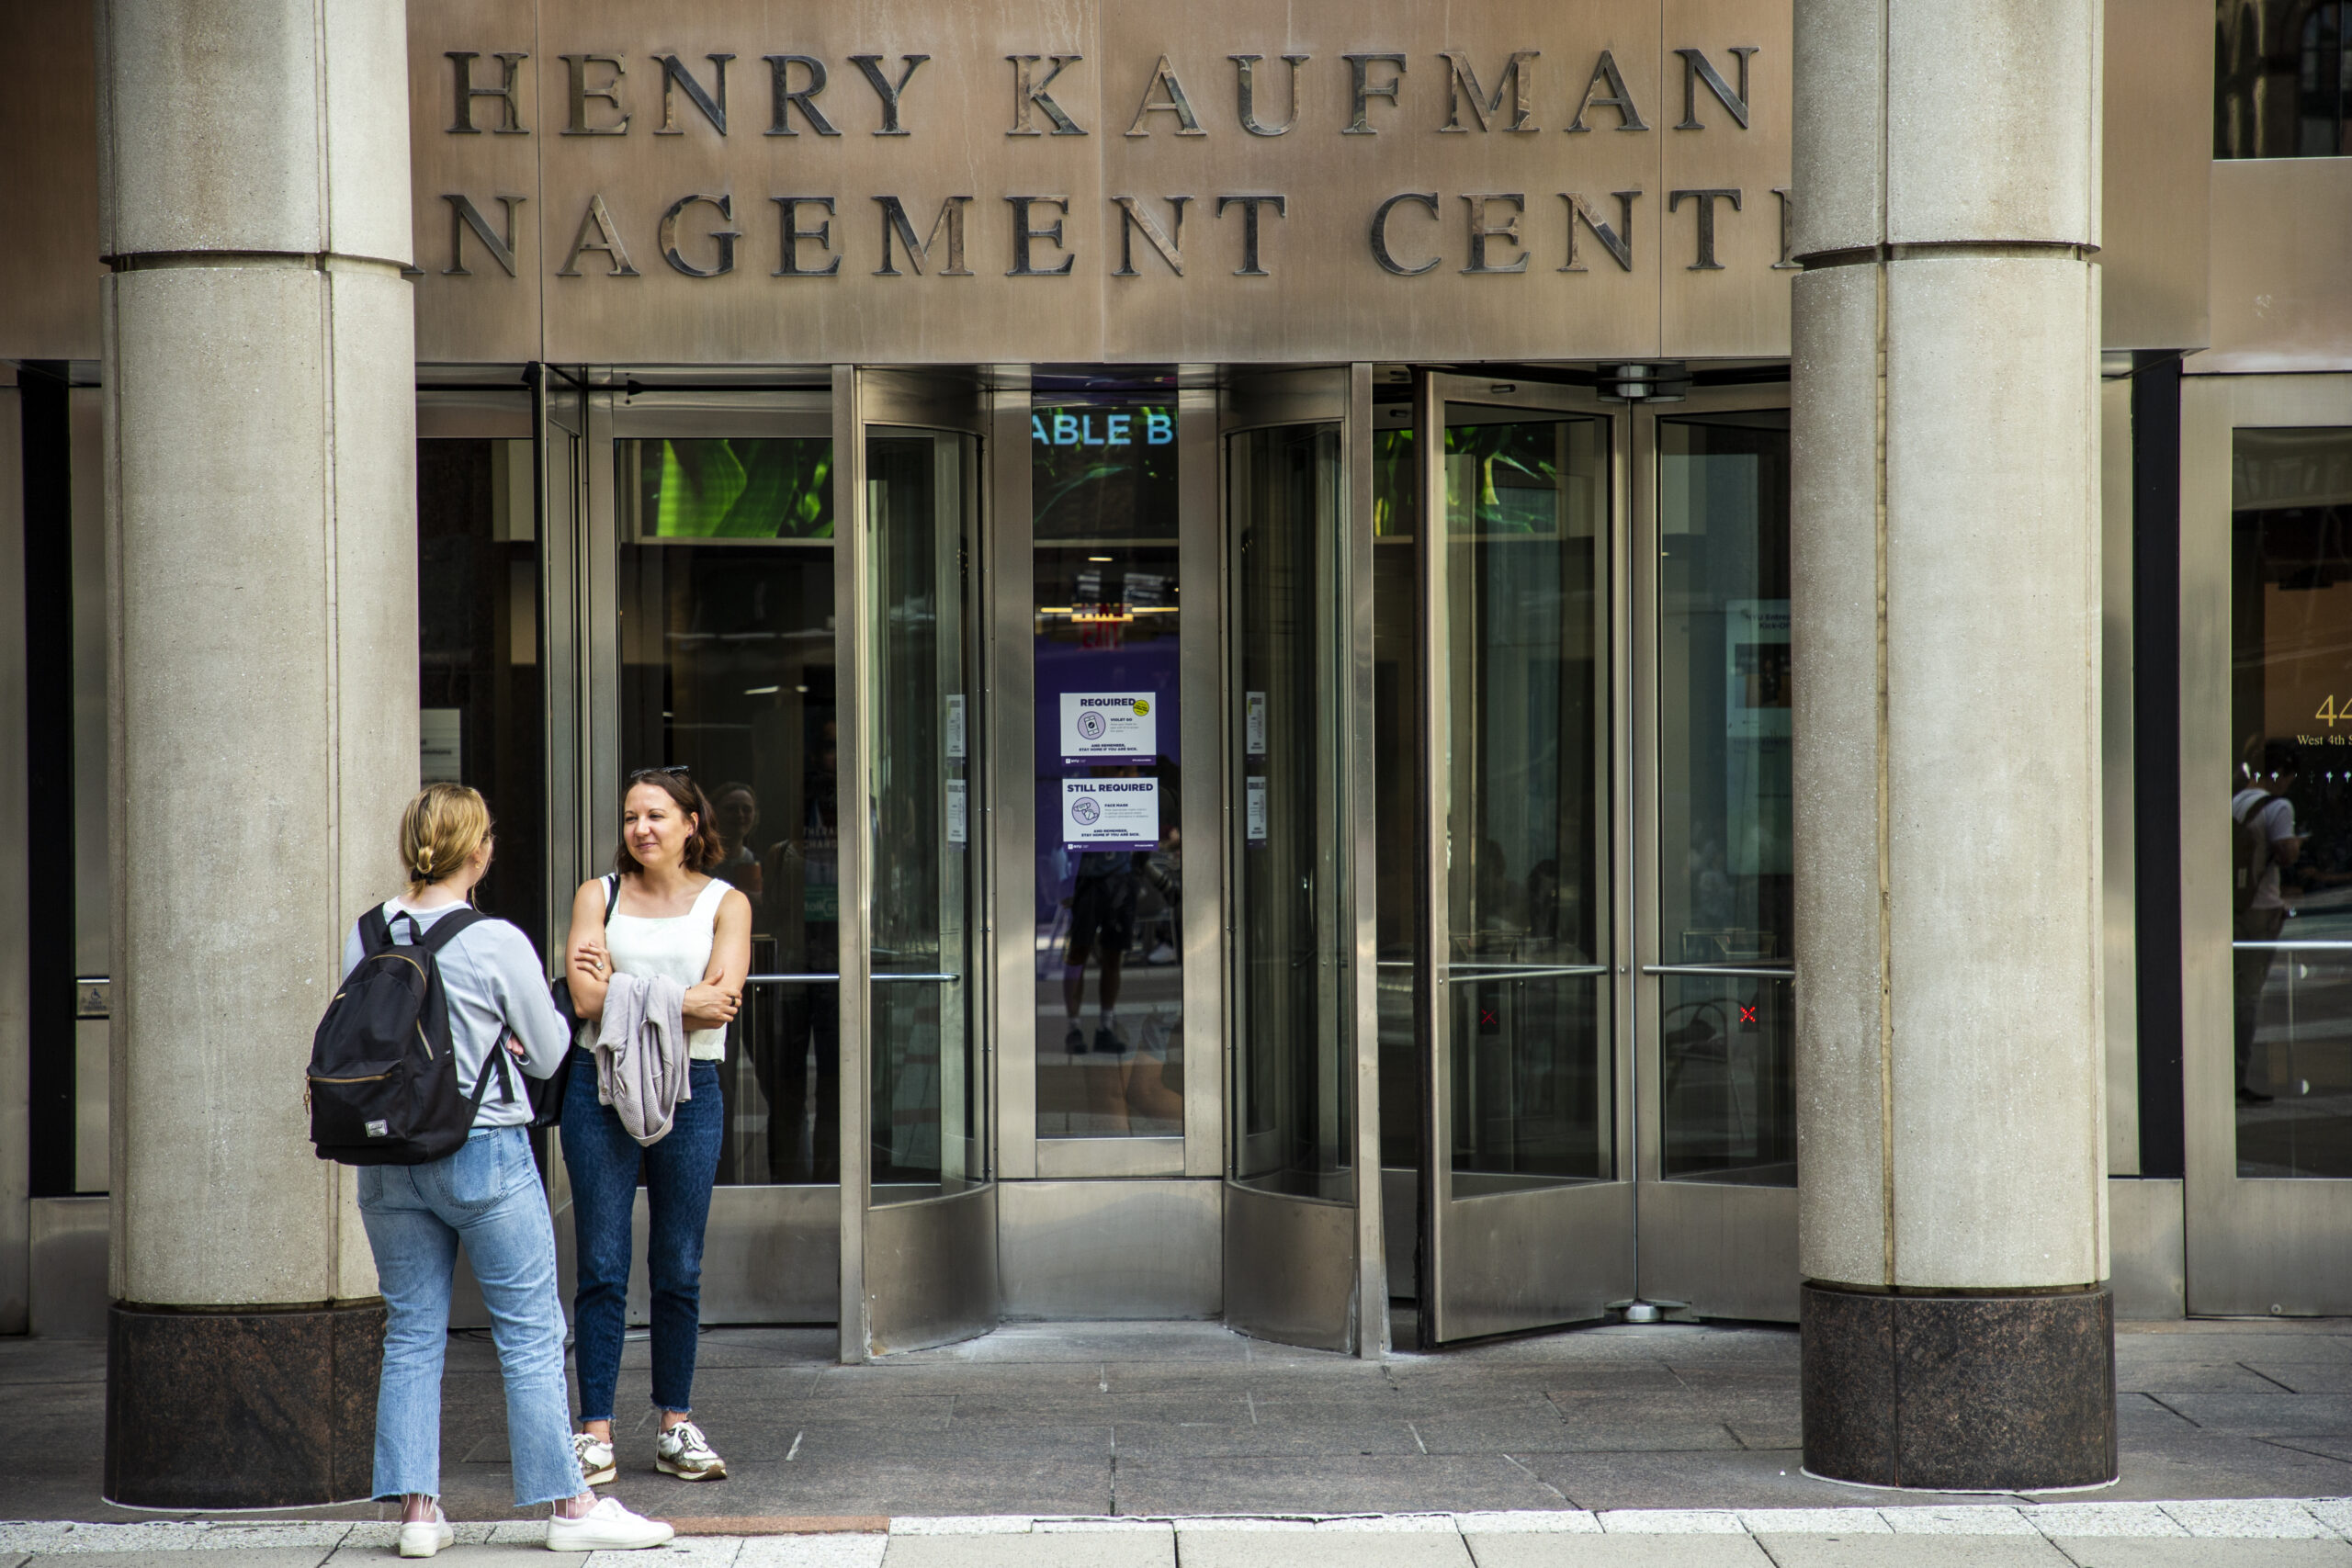 Two female-presenting students standing outside the entrance of NYU’s Stern School of Business, the Henry Kaufman Management Center.